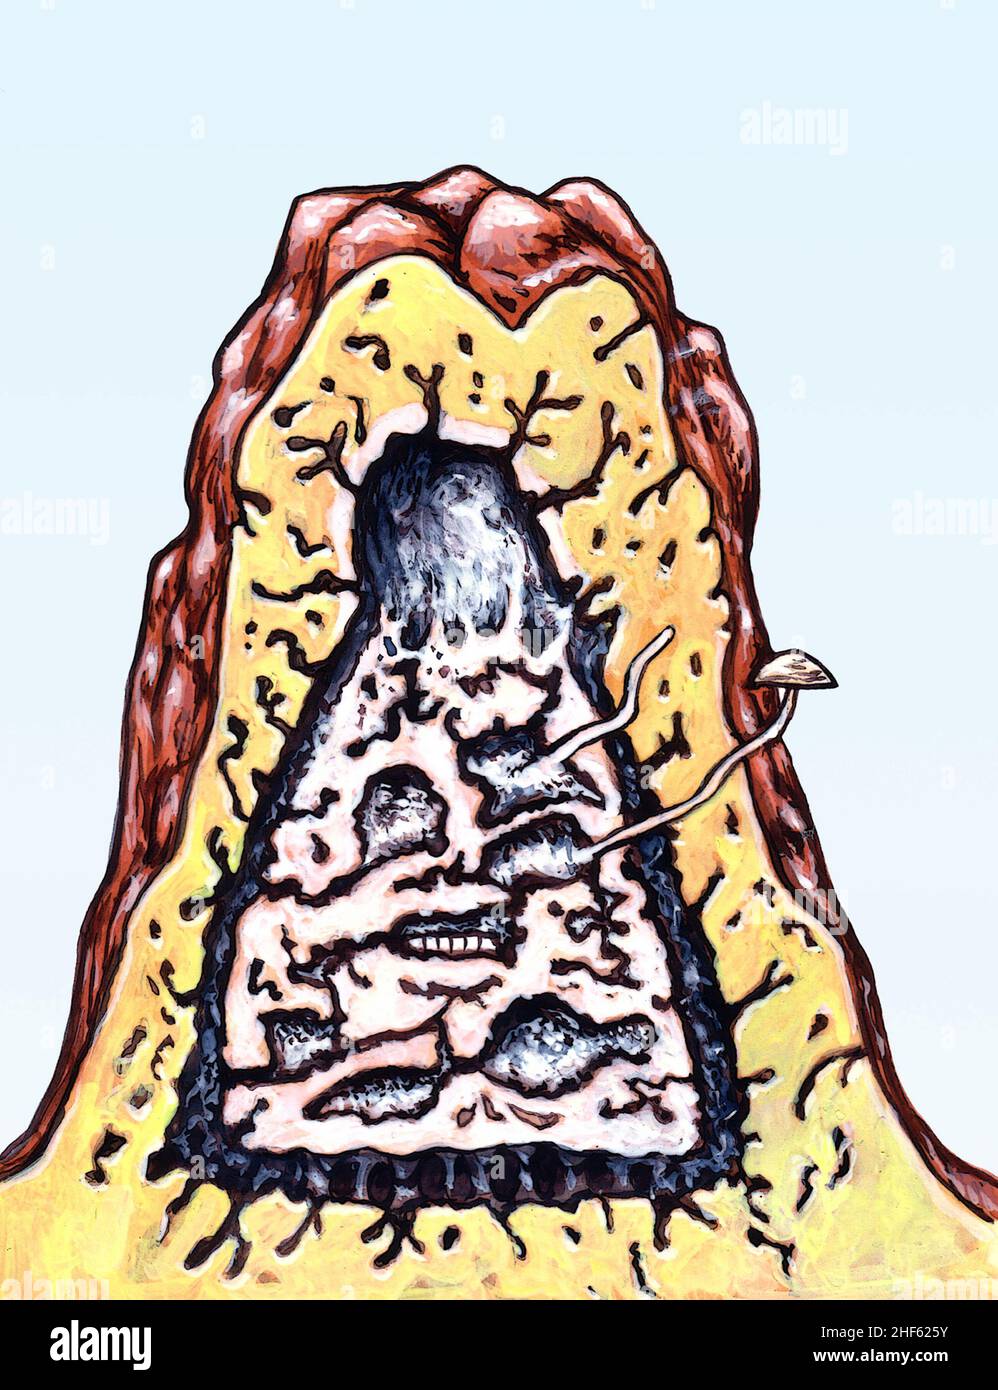 Diagram: inside a termite mound, showing how African  Macrotermitinae termites grow omajowa mushrooms in underground chambers. Plant-animal symbiosis. Stock Photo